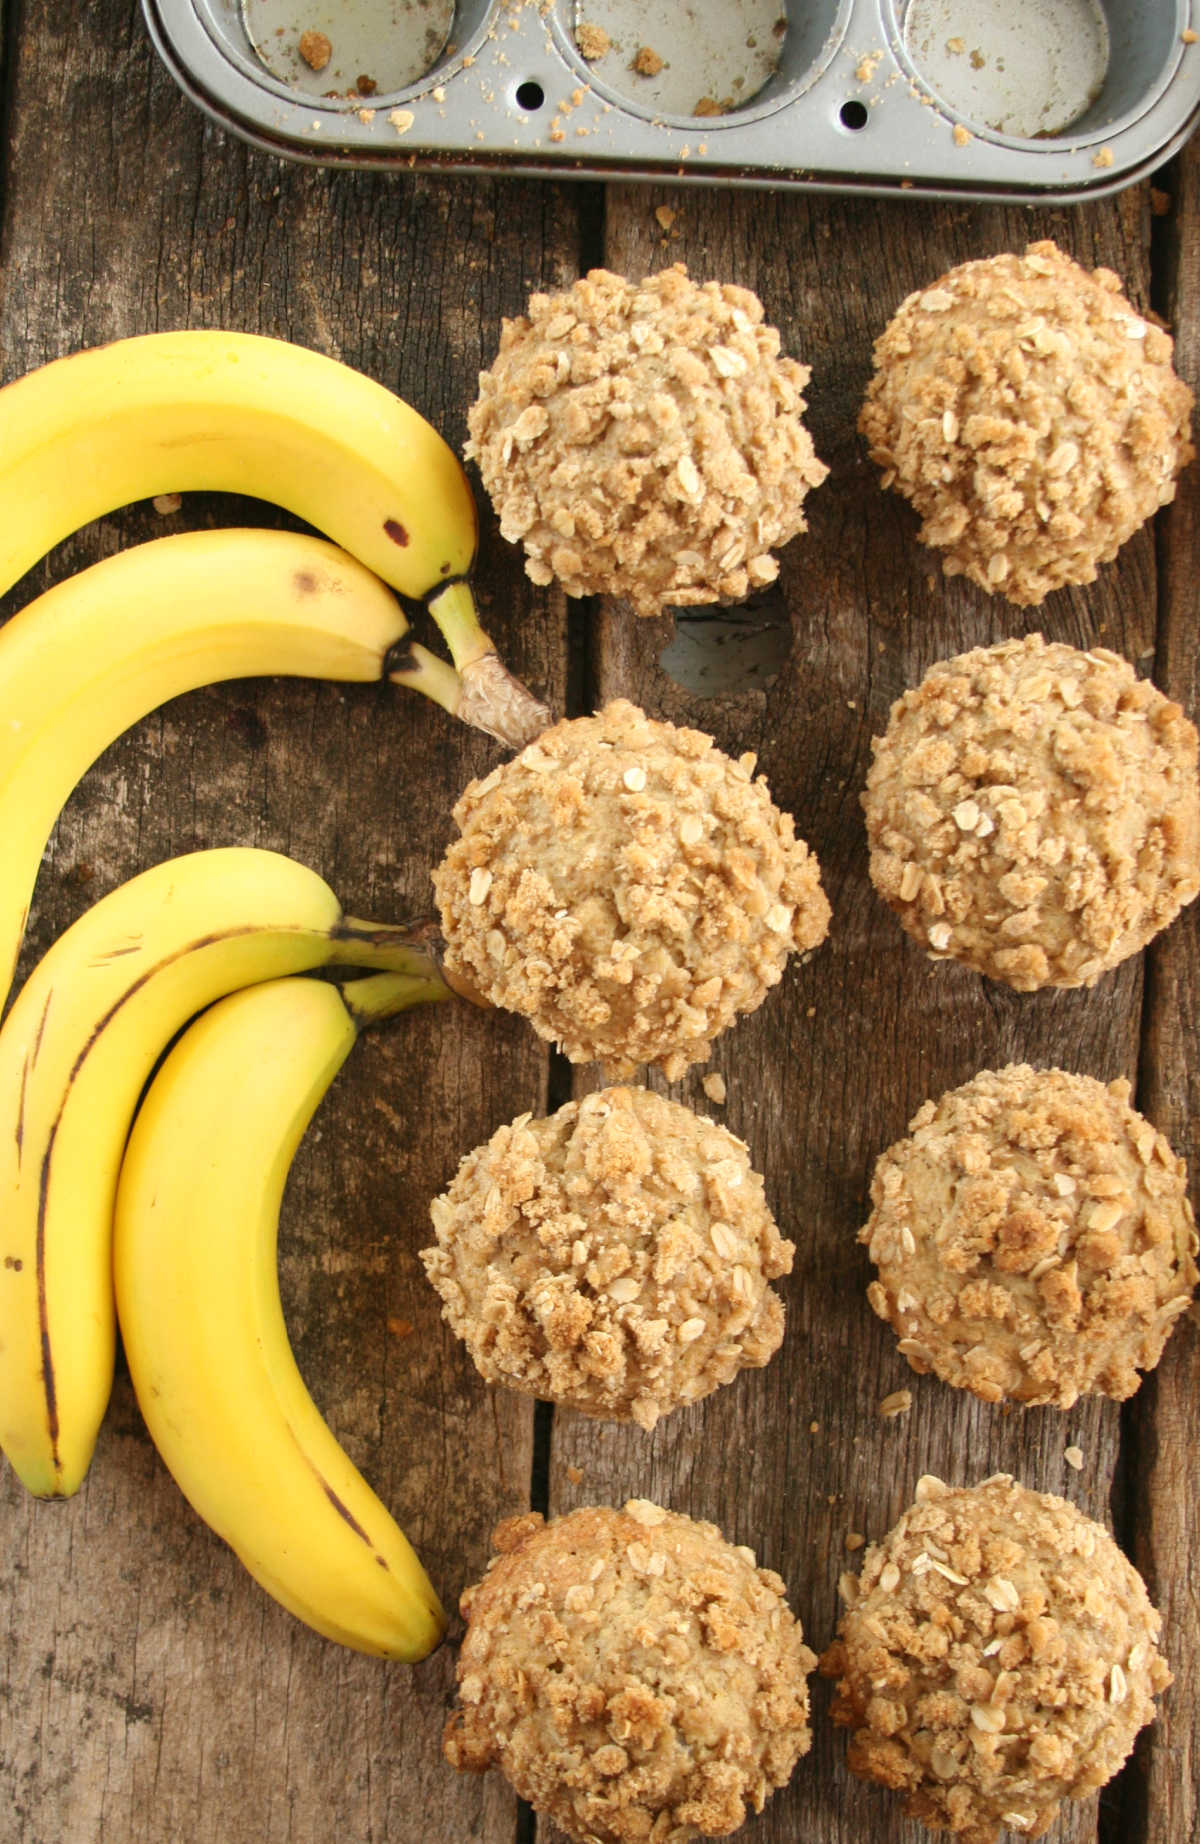 Banana oatmeal muffins on reclaimed wood boards, ripe bananas to left.